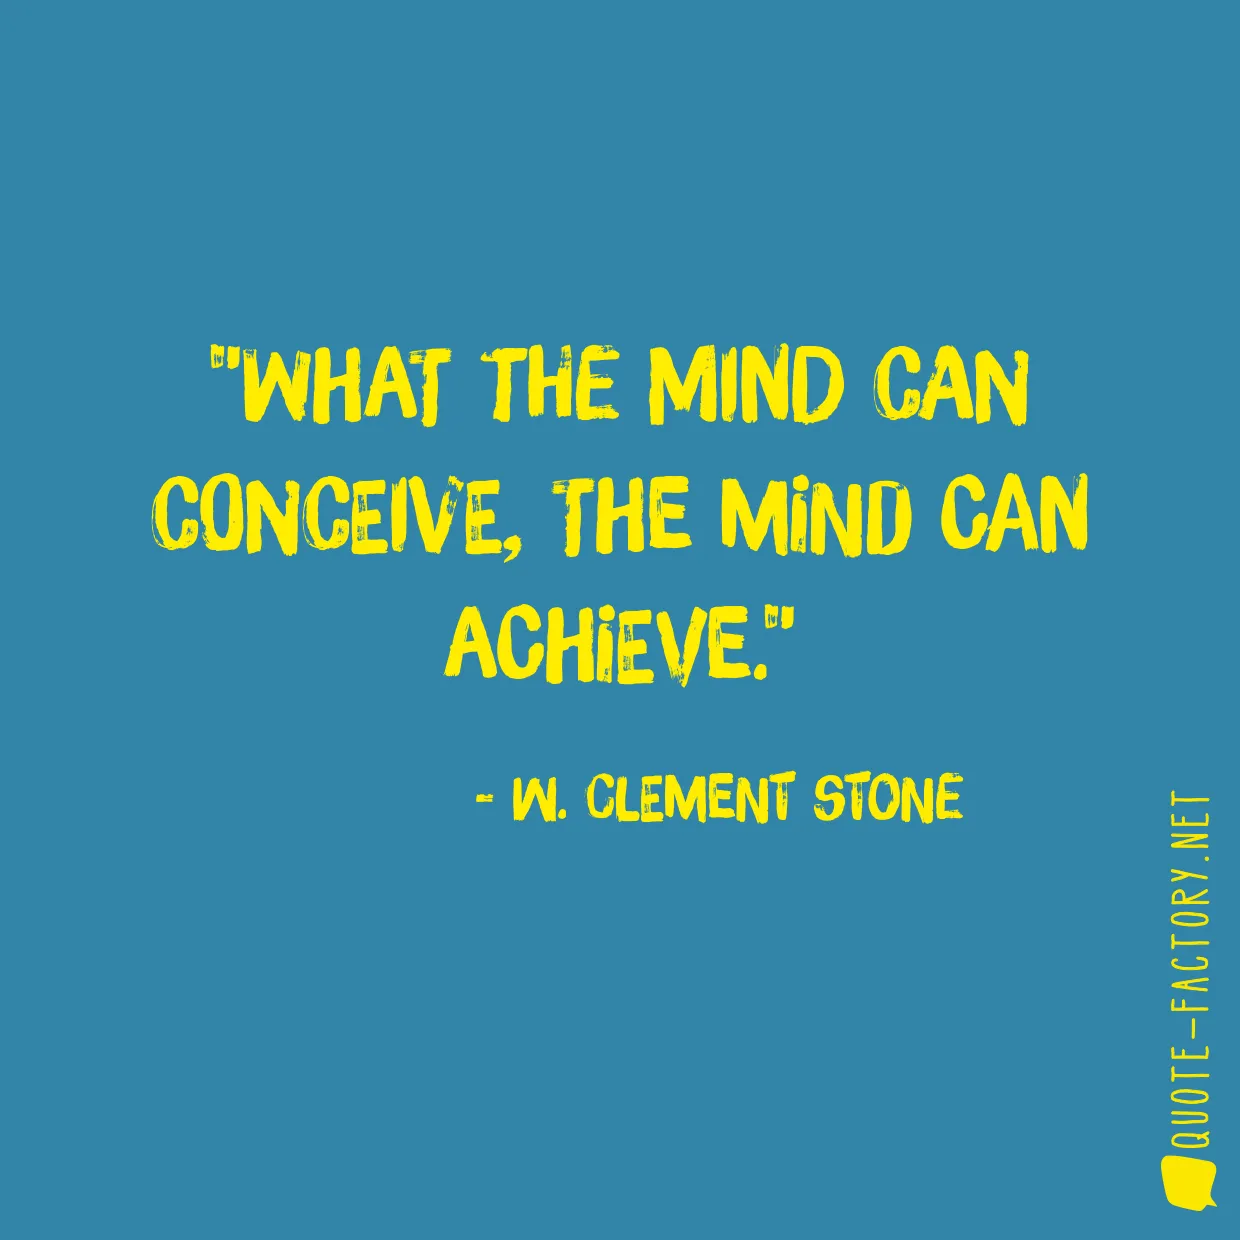 What the mind can conceive, the mind can achieve.